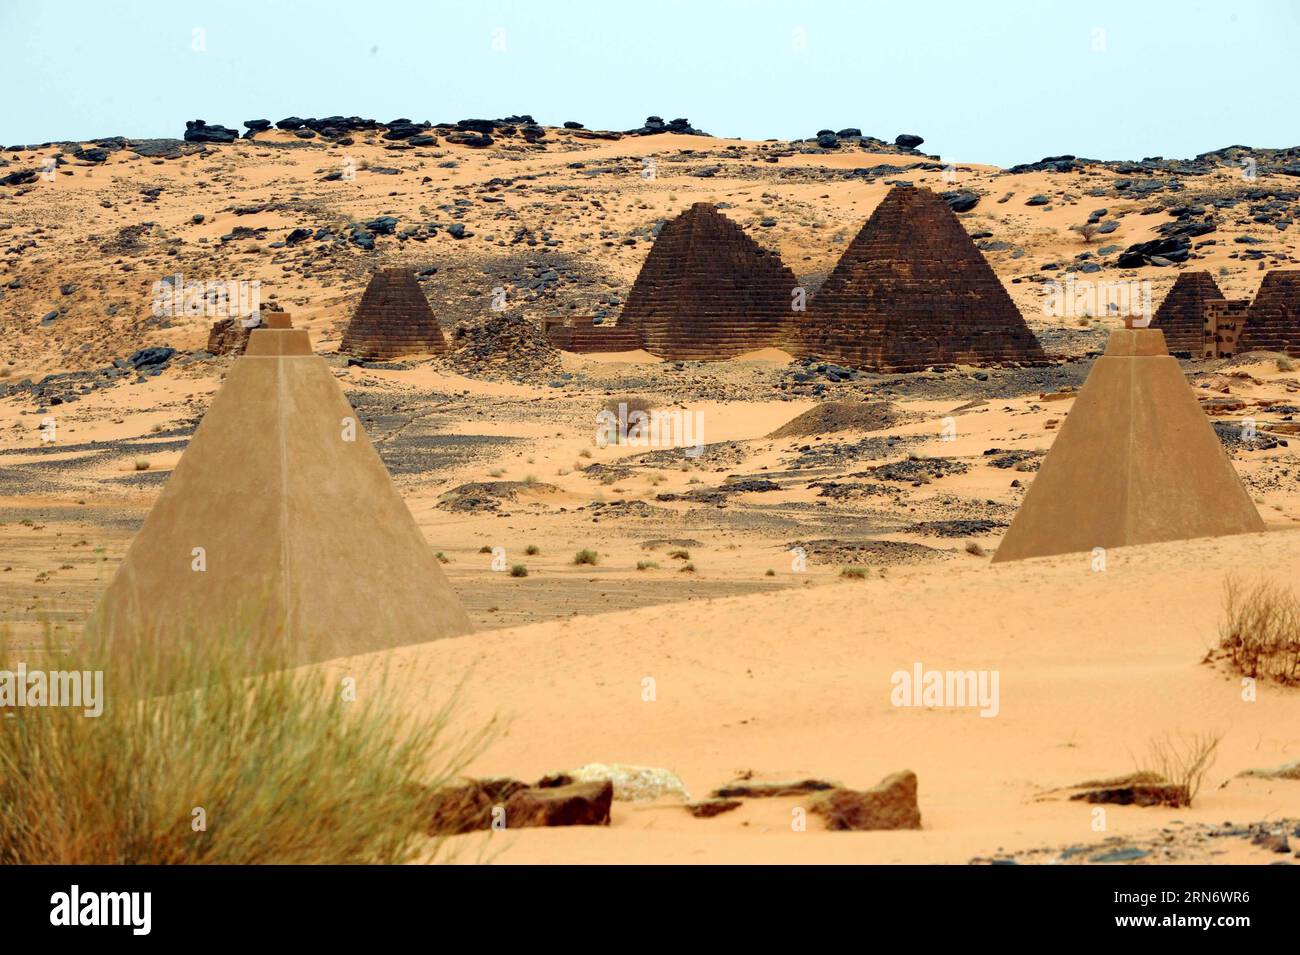 Pyramiden von Meroe in Sudan (150808) -- KHARTOUM,  - Photo taken on Aug. 7, 2015 shows Meroe Pyramids to tourist in Meroe, 250km north of Khartoum, capital of Sudan. The Archaeological Sites of the Island of Meroe, a semi-desert landscape between the Nile and Atbara rivers, was the heartland of the Kingdom of Kush, a major power from the 8th century B.C. to the 4th century A.D. The property consists of the royal city of the Kushite kings at Meroe, near the River Nile, the nearby religious site of Naqa and Musawwarat es Sufra. )(bxq) SUDAN-KHARTOUM-MEROE PYRAMIDS LixZiheng PUBLICATIONxNOTxINxC Stock Photo